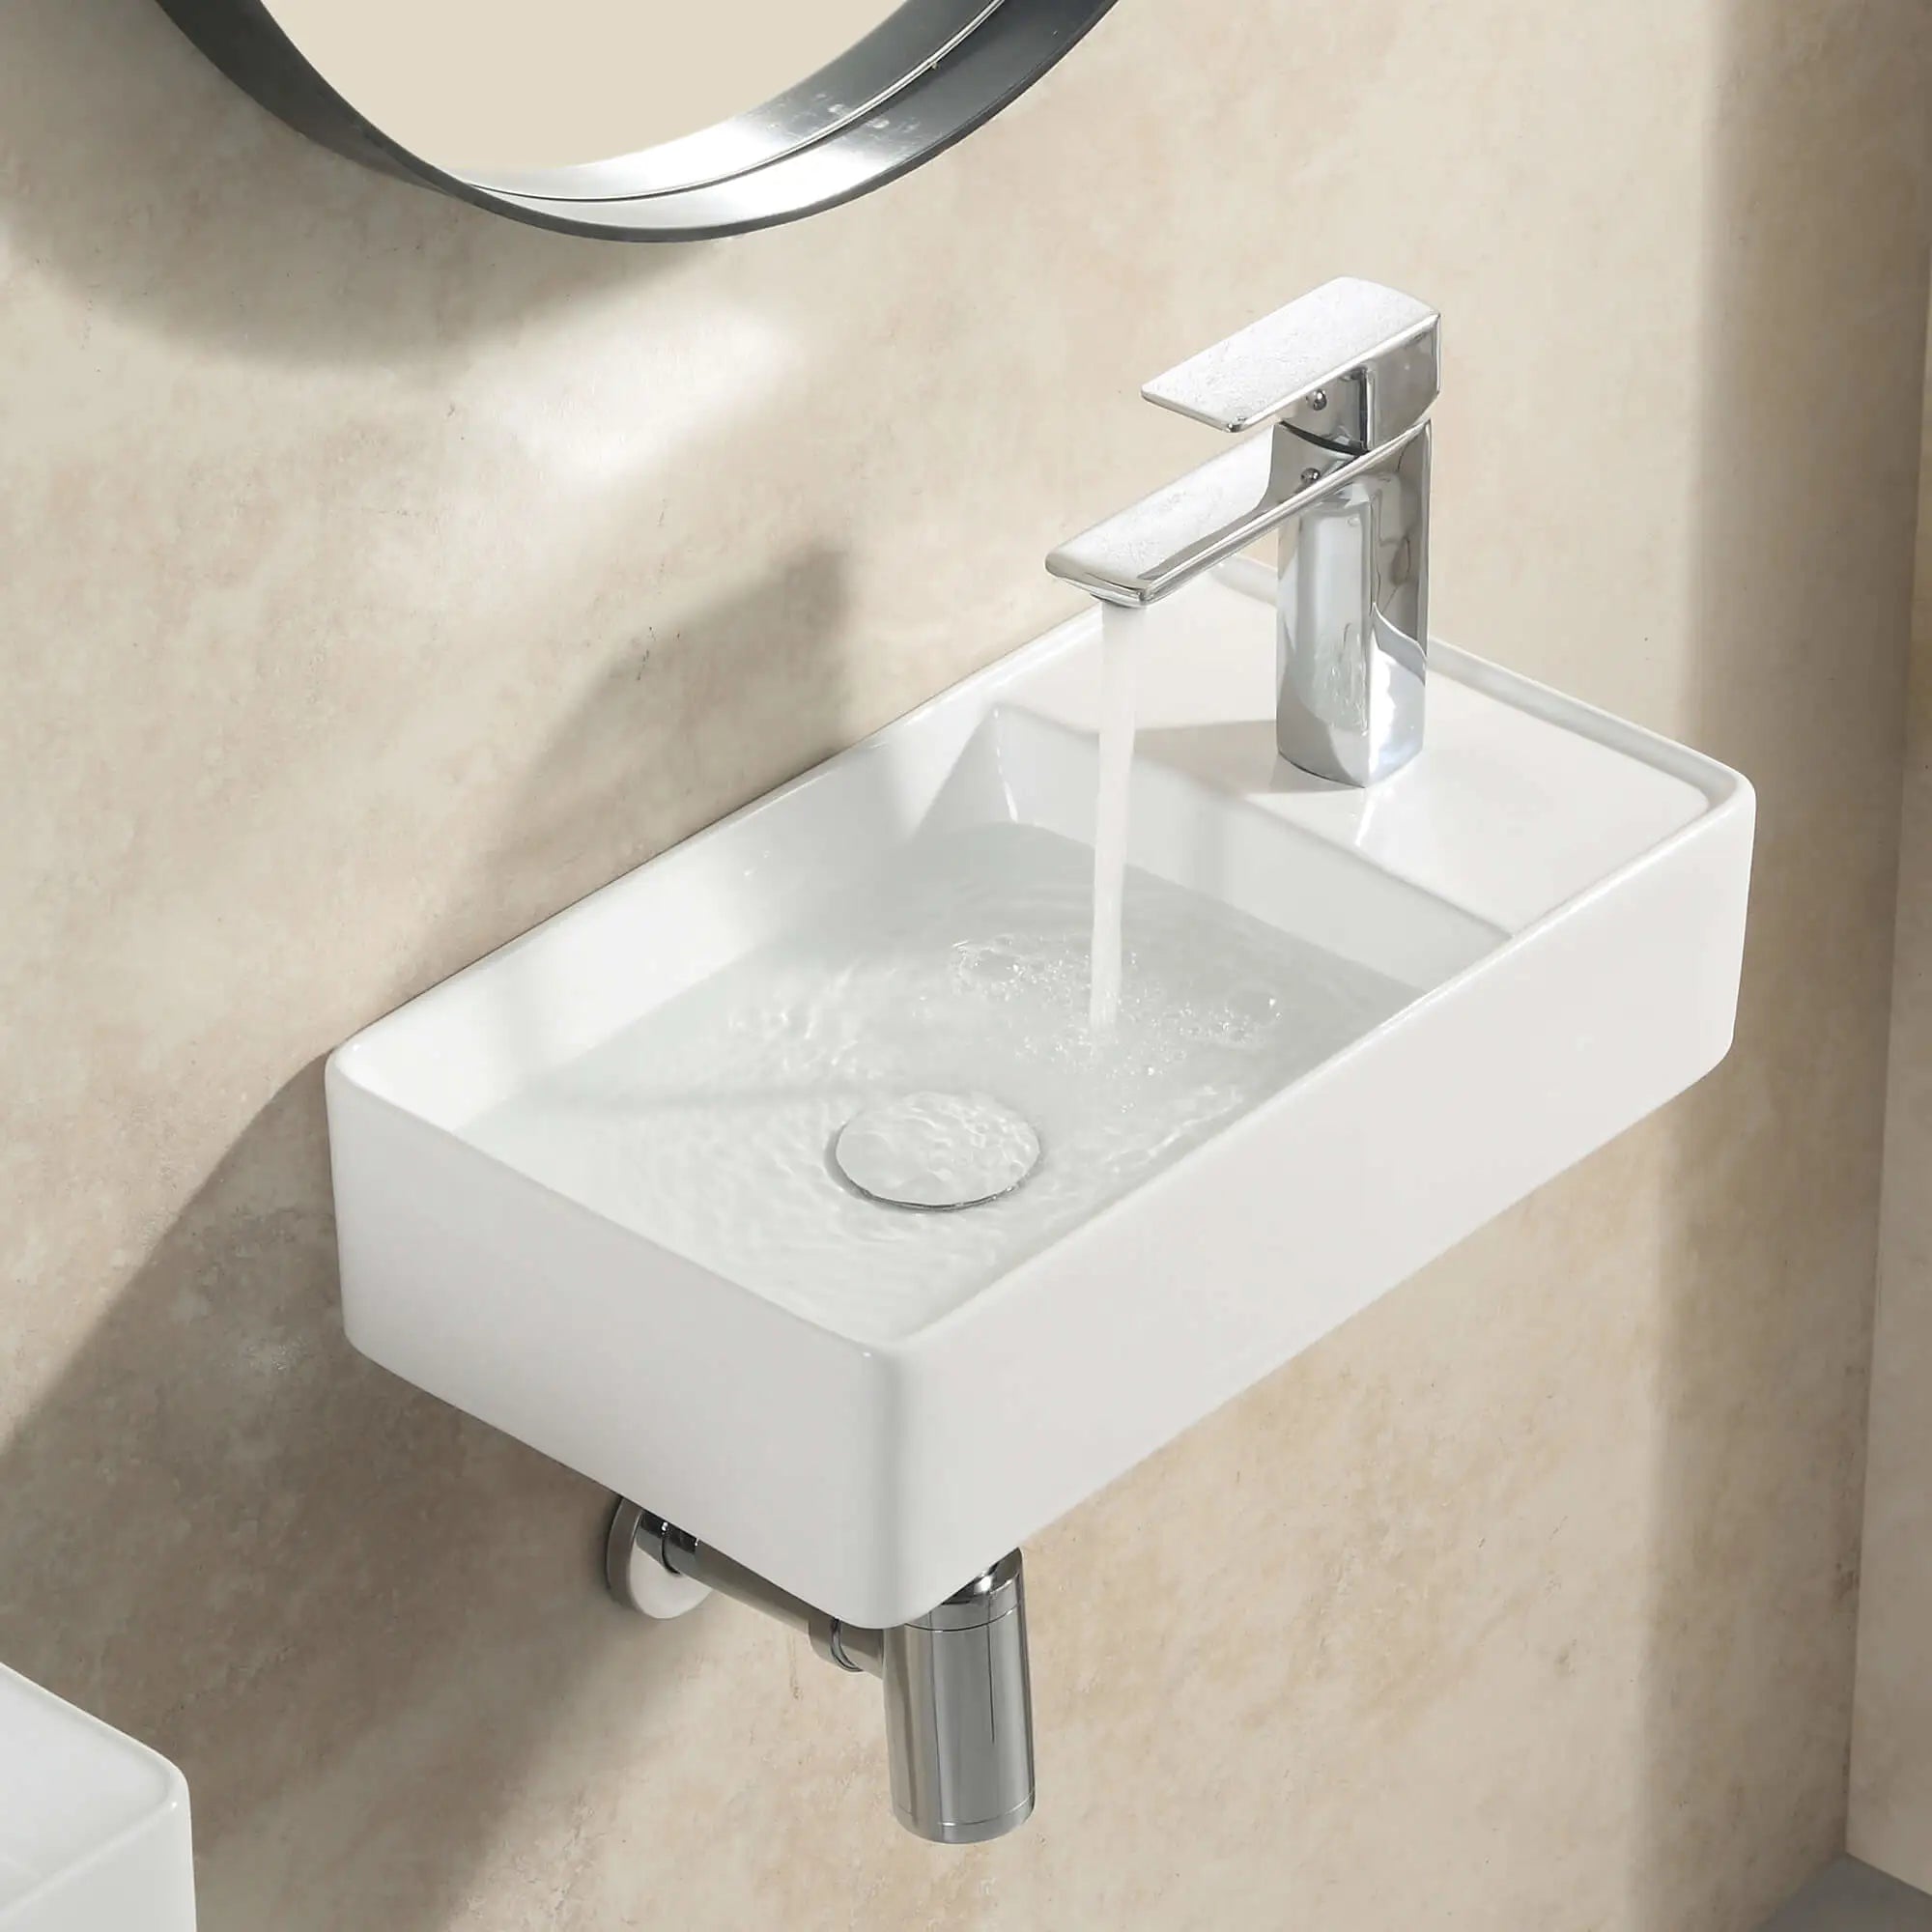 HOROW Small Wall Mount Sink Model HWTP-S4625WR